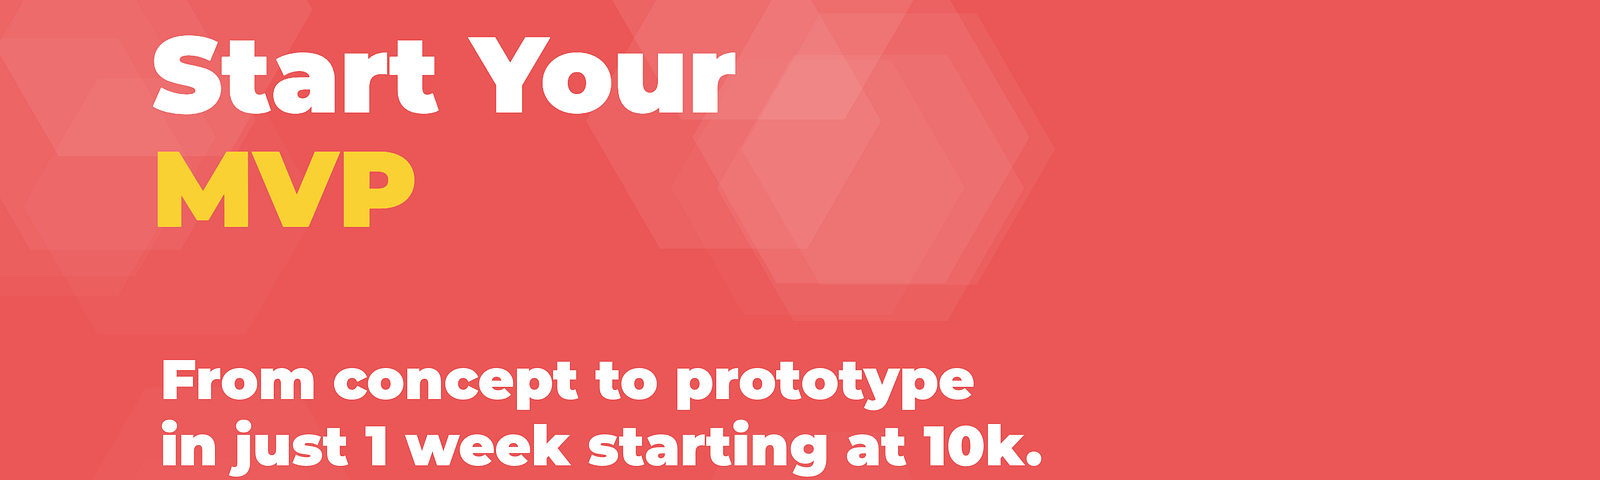 FirstMVP is a rapid prototyping service by Toi.io